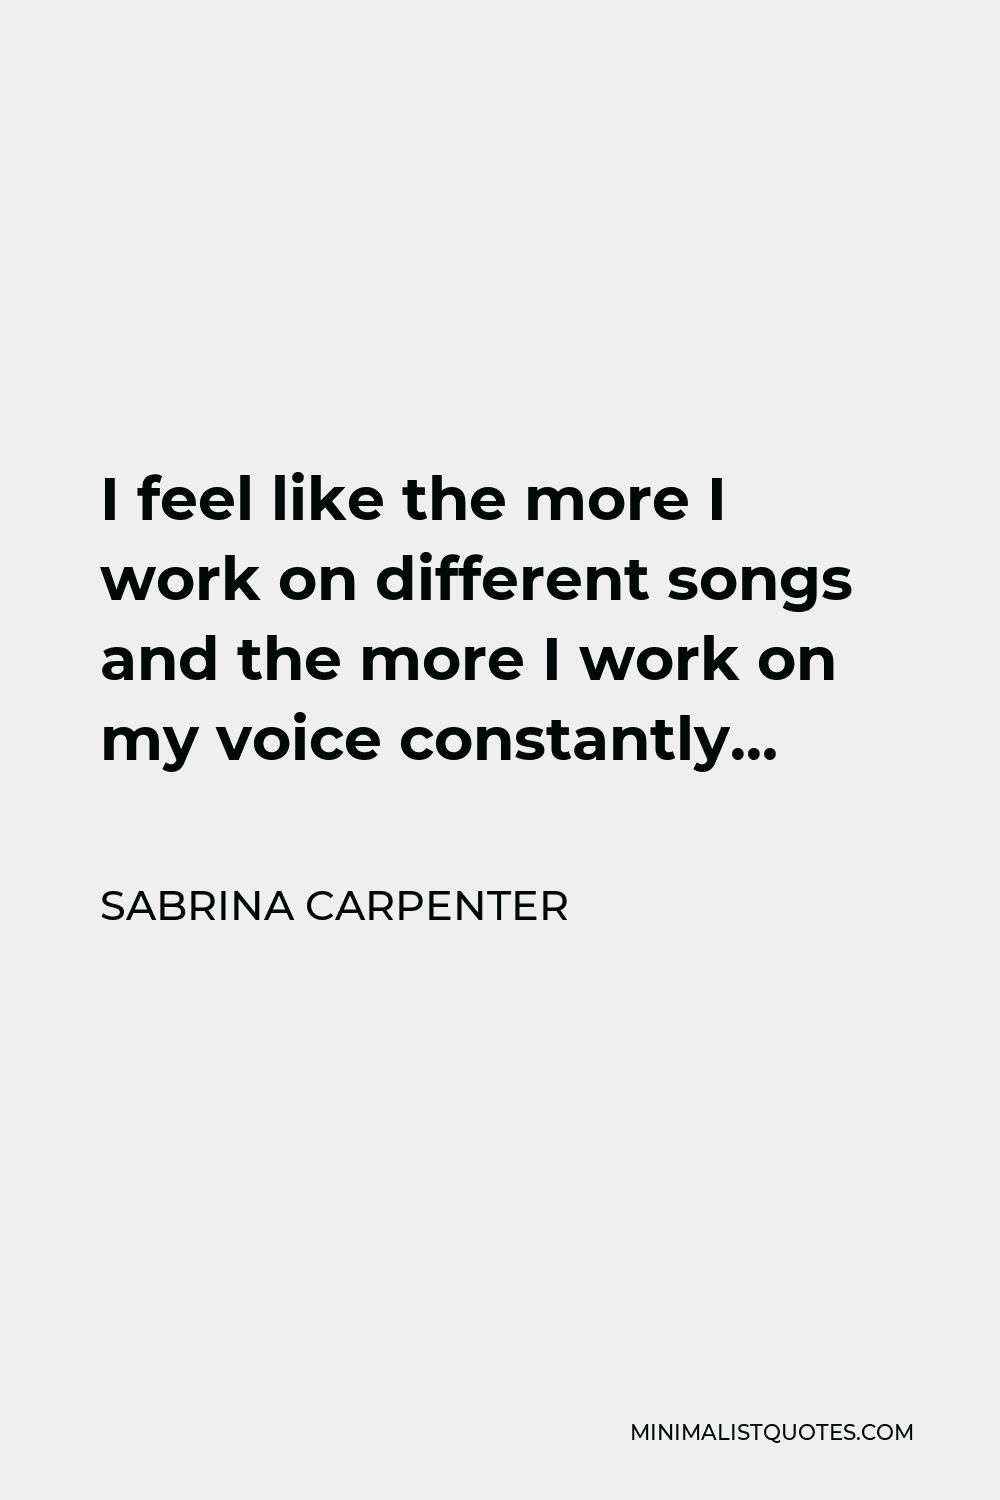 Sabrina Carpenter Quote - I feel like the more I work on different songs and the more I work on my voice constantly…